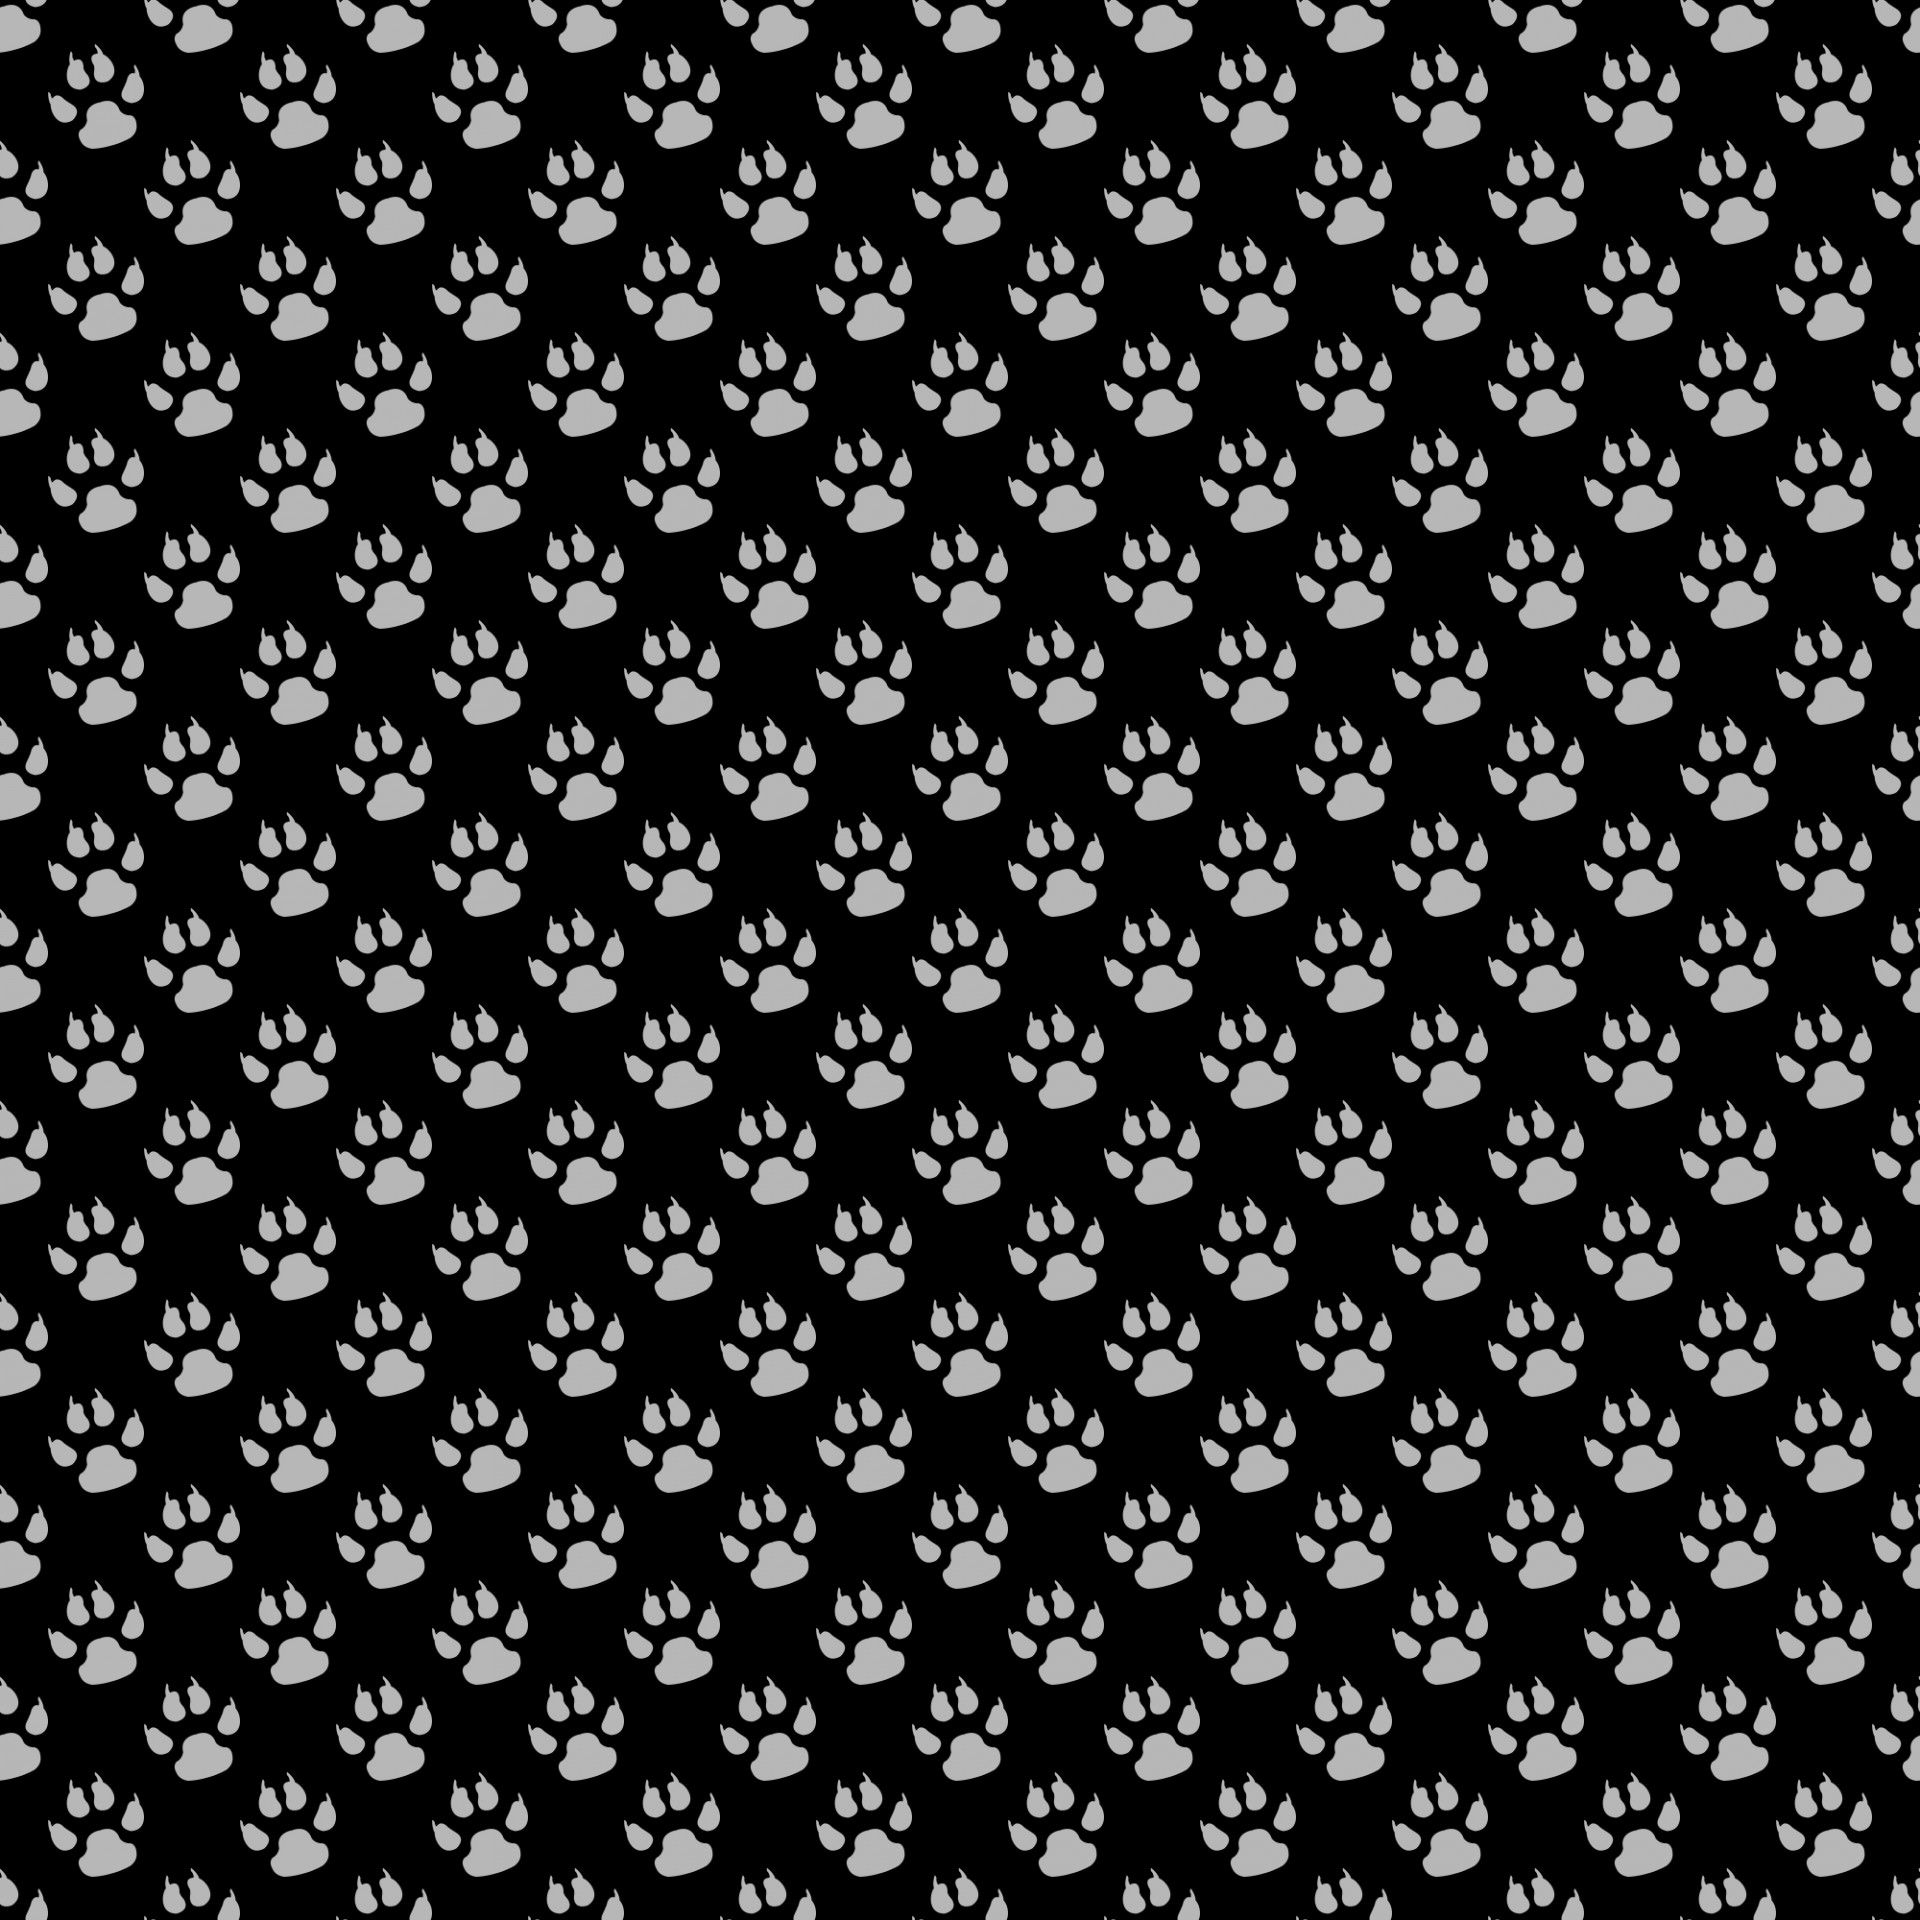 1920x1920 Cat Paw Print Wallpapers Top Free Cat Paw Print Backgrounds